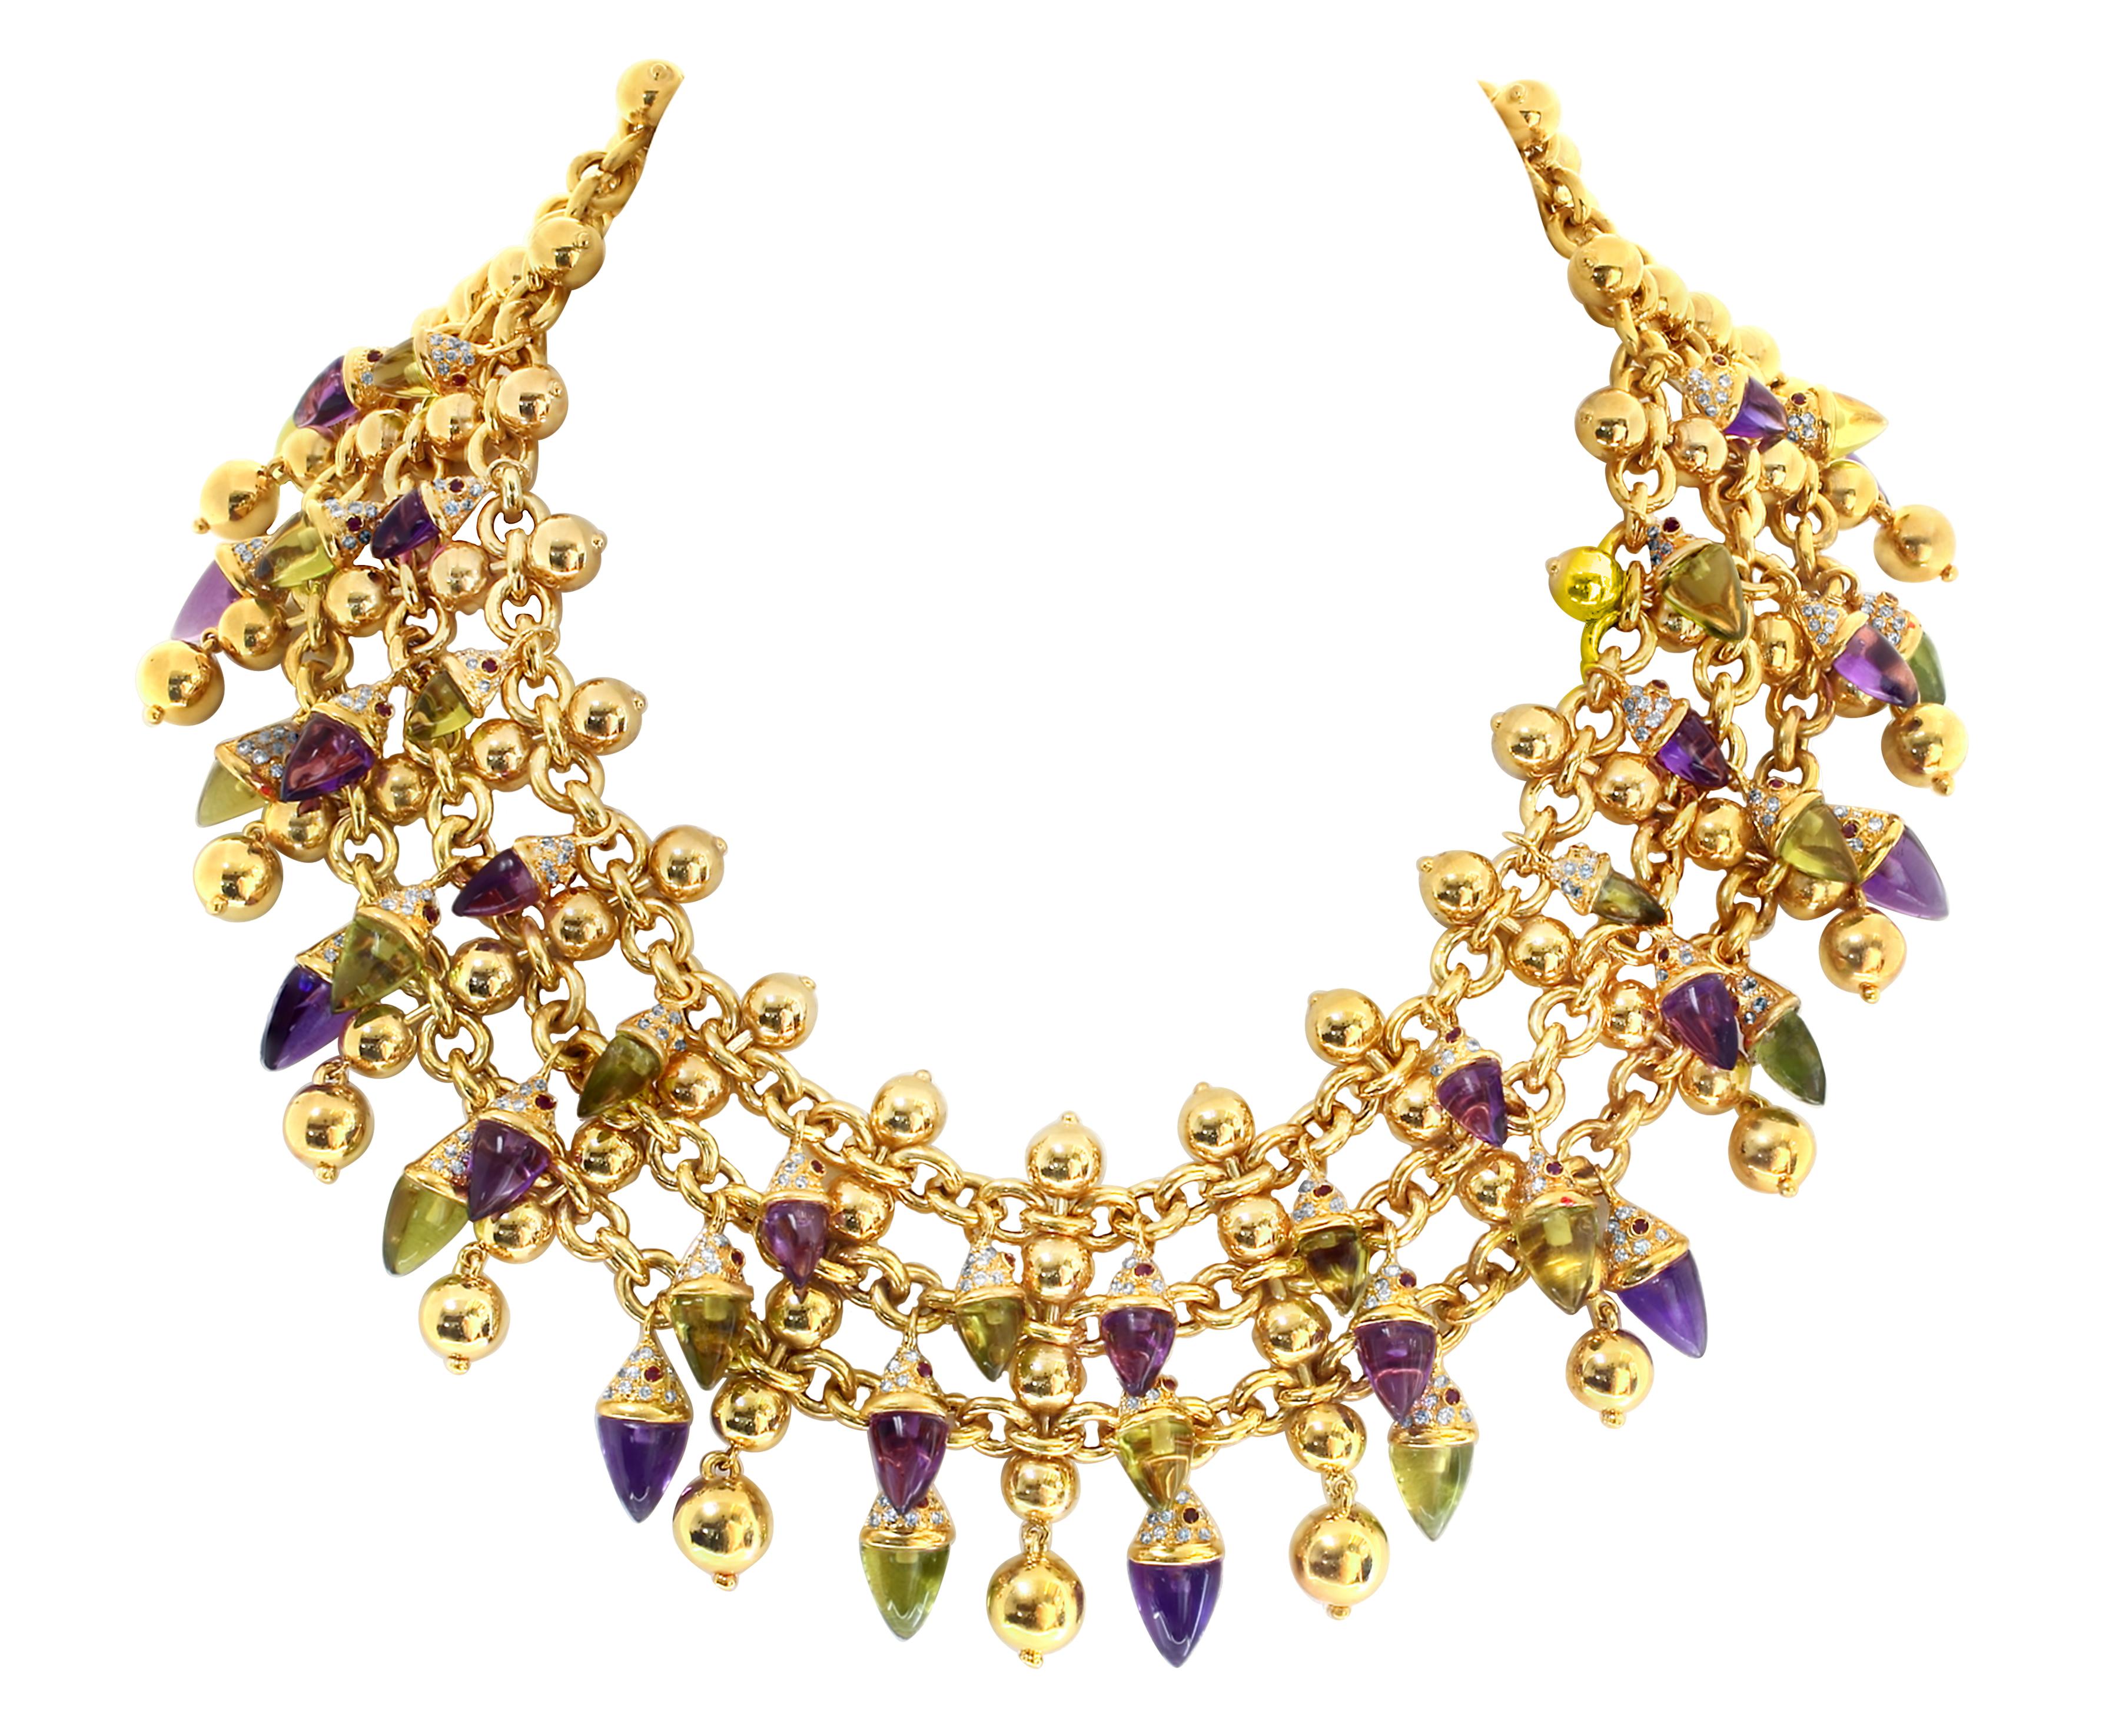 
Designed as a bib set with Amethyst and peridot in  Trilliion  cut Cabochon with  Ruby  and diamonds, mounted in 18 Karat  yellow gold  
Each Trillion has 1 ruby and 10 diamonds 
There are 42 trillions, 21  of Amethyst and 21 of the peridot
Solid